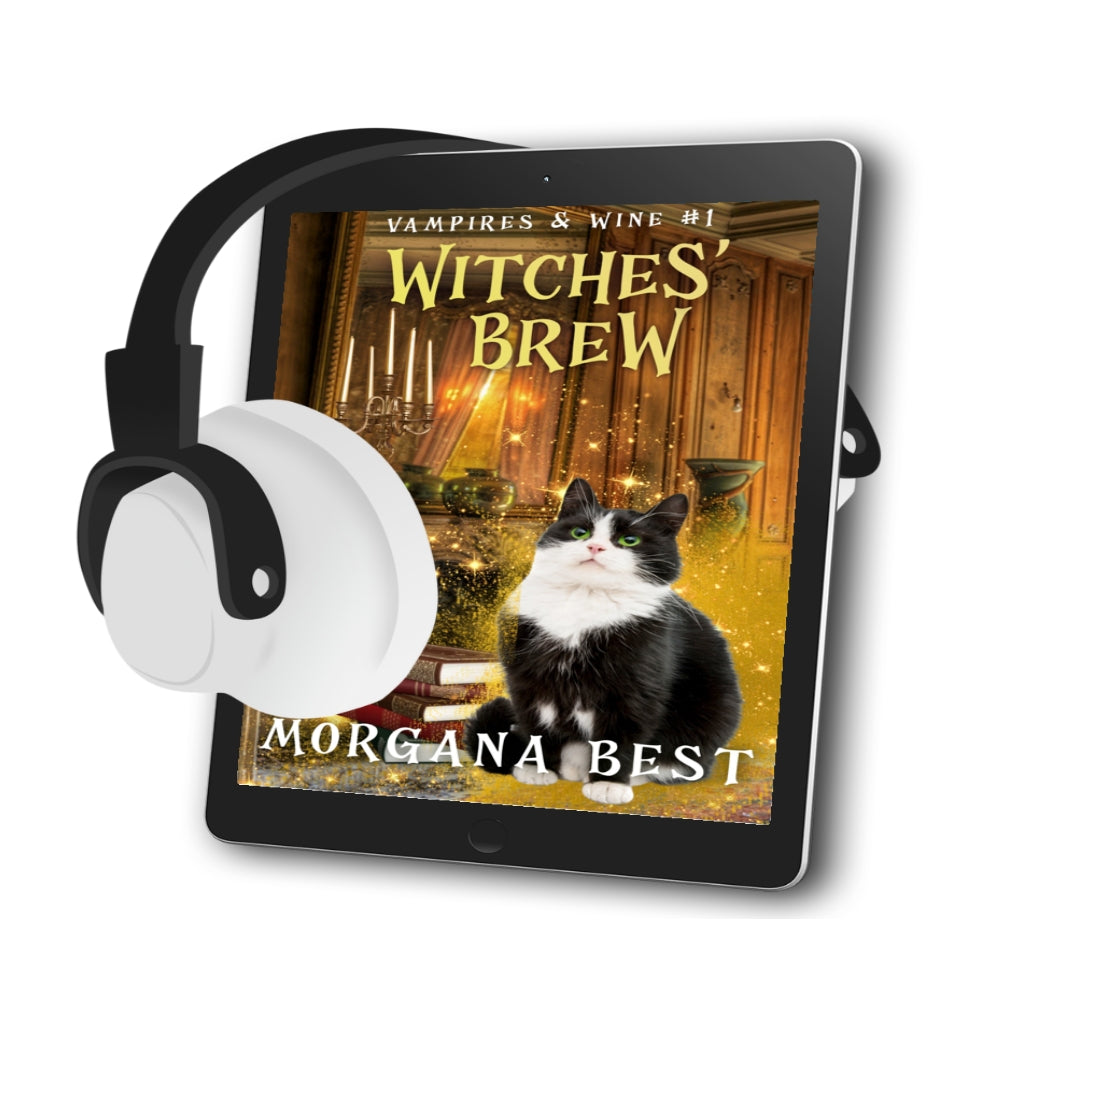 Witches’ Brew audiobook cozy mystery cozy fantasy morgana best